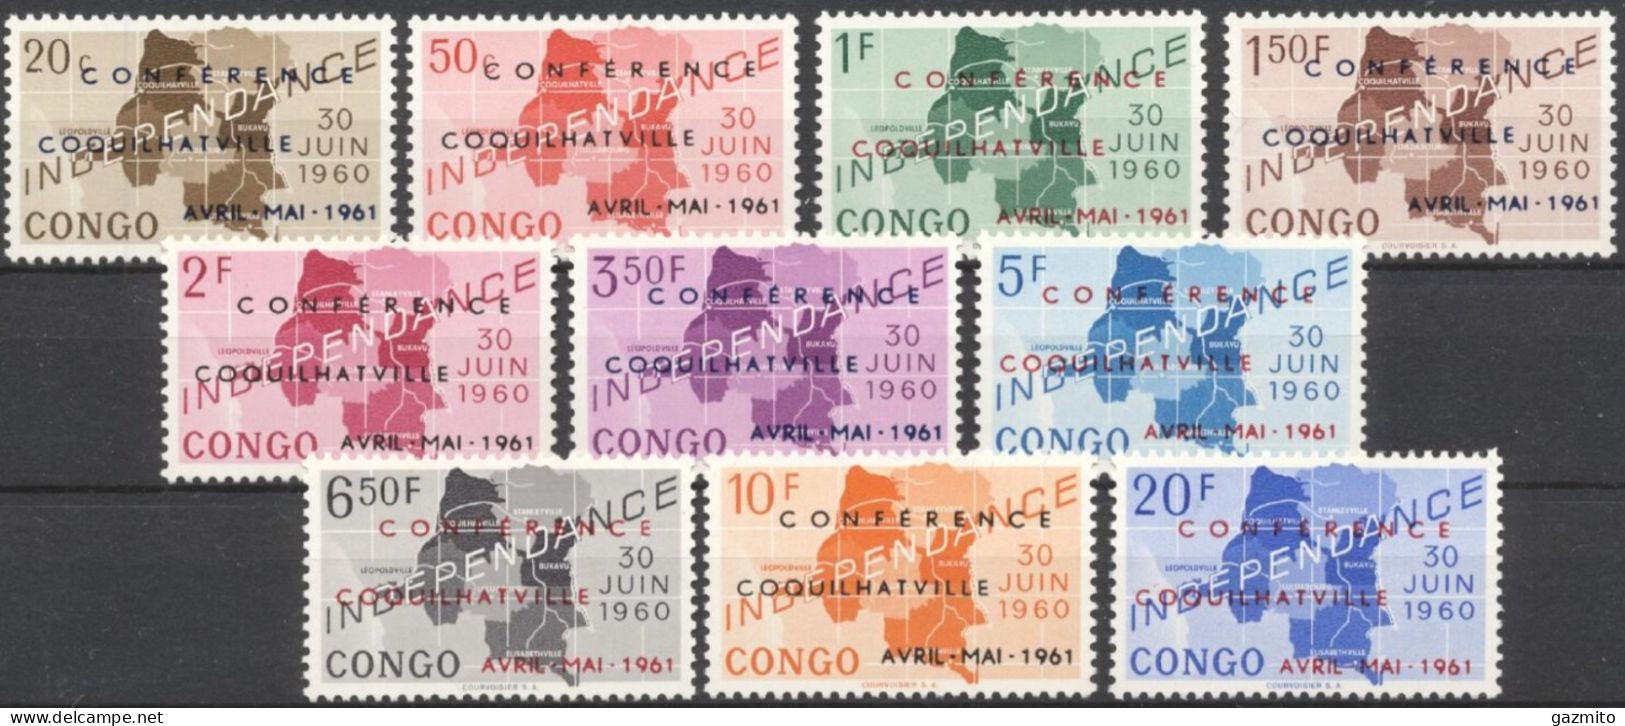 Congo Ex Zaire 1961, Coquilhatville Conference - Overprinted CONFERENCE COQUILHATVILLE AVRIL-MAI-1961, 10val - Géographie